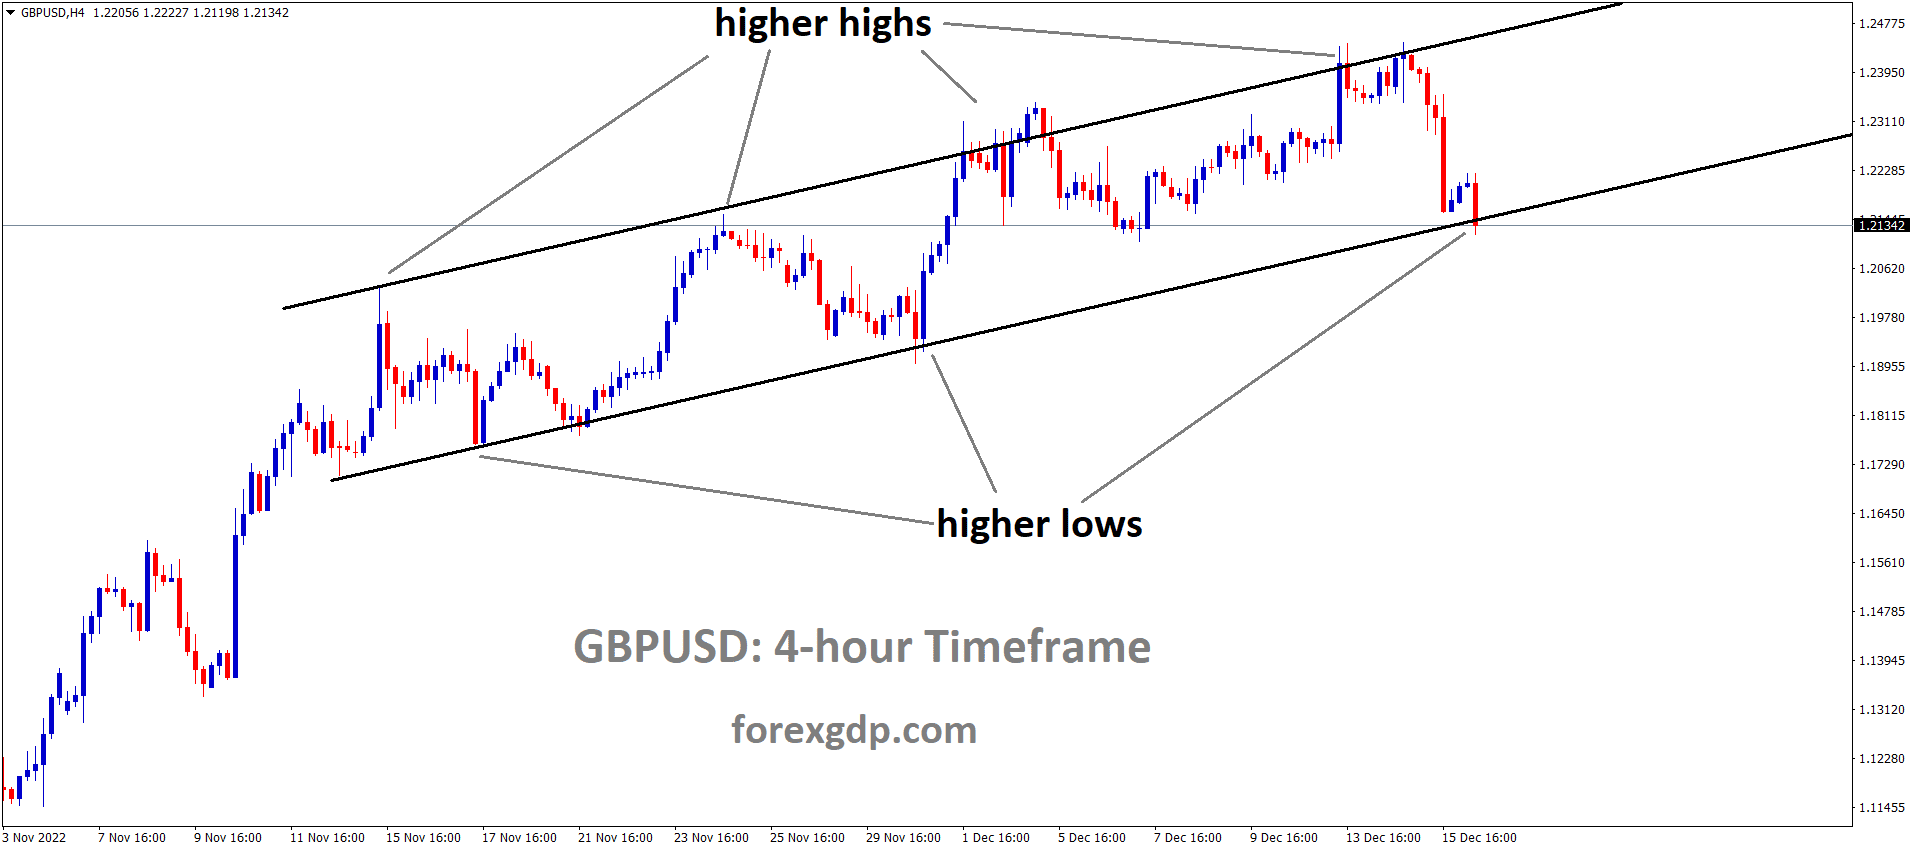 GBPUSD is moving in an Ascending channel and the market has reached the higher low area of the channel 2